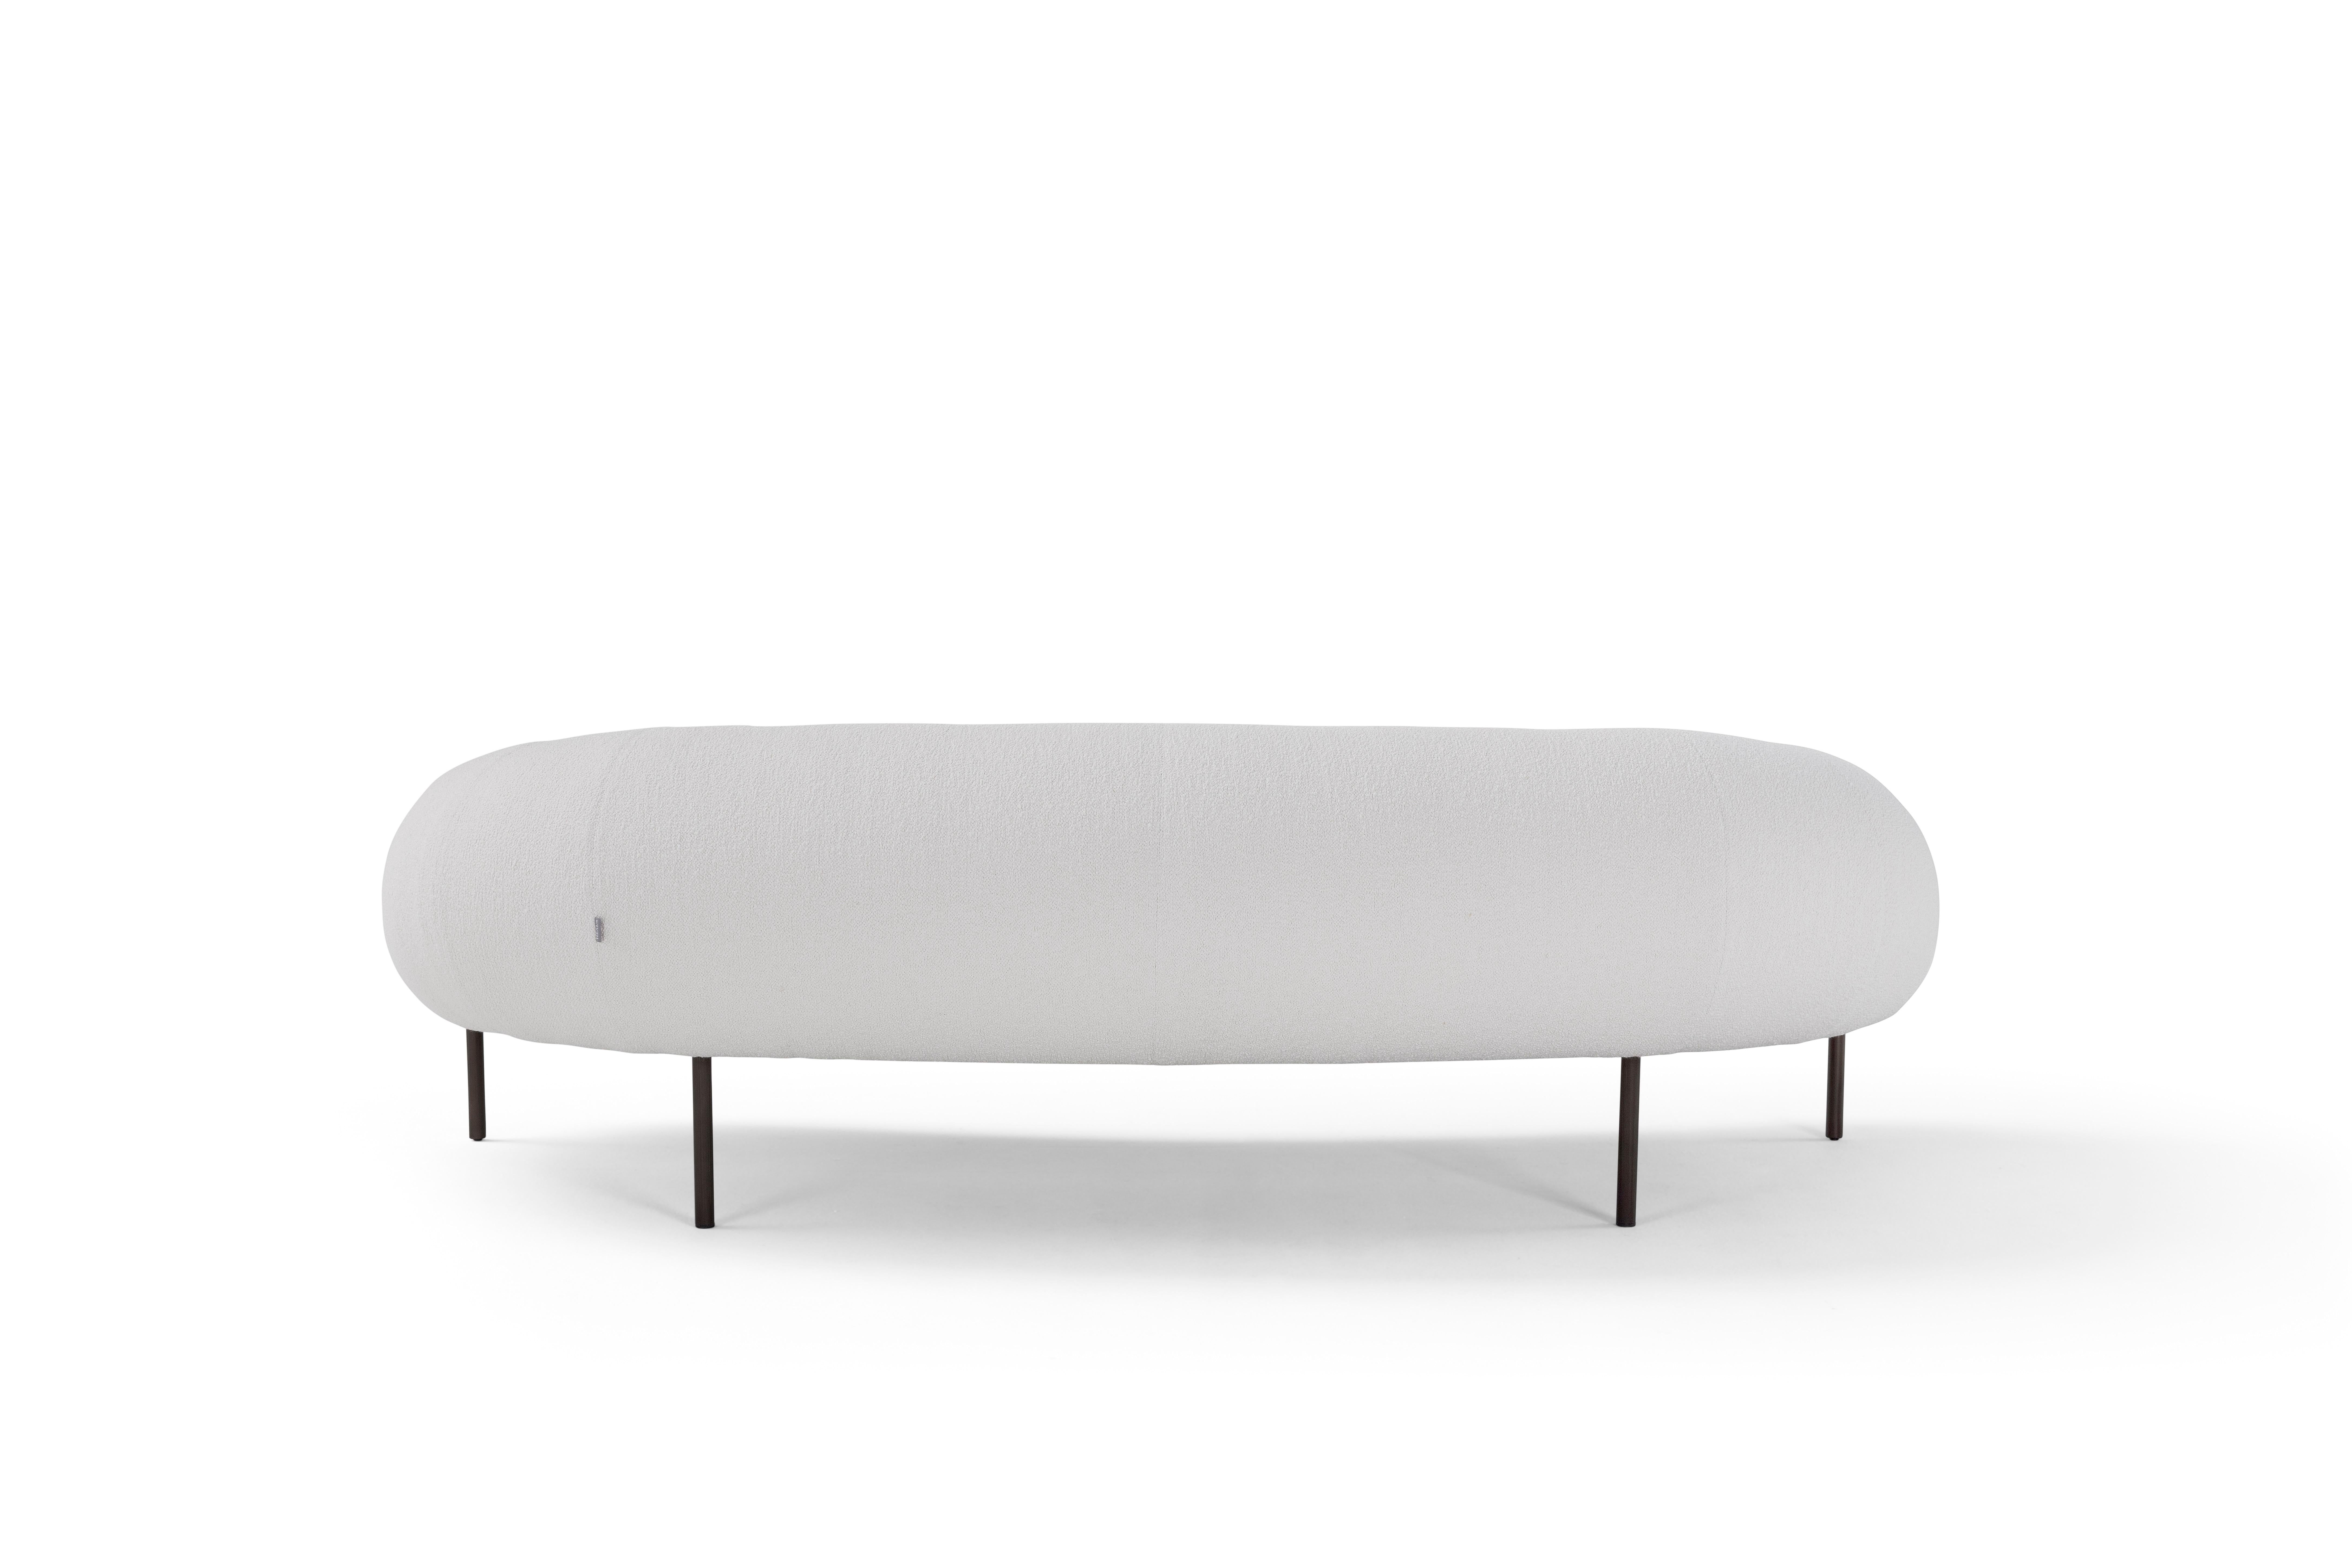 Textile Contemporary Sofa 'Isola' by Amura Lab, Ortisei 01 For Sale